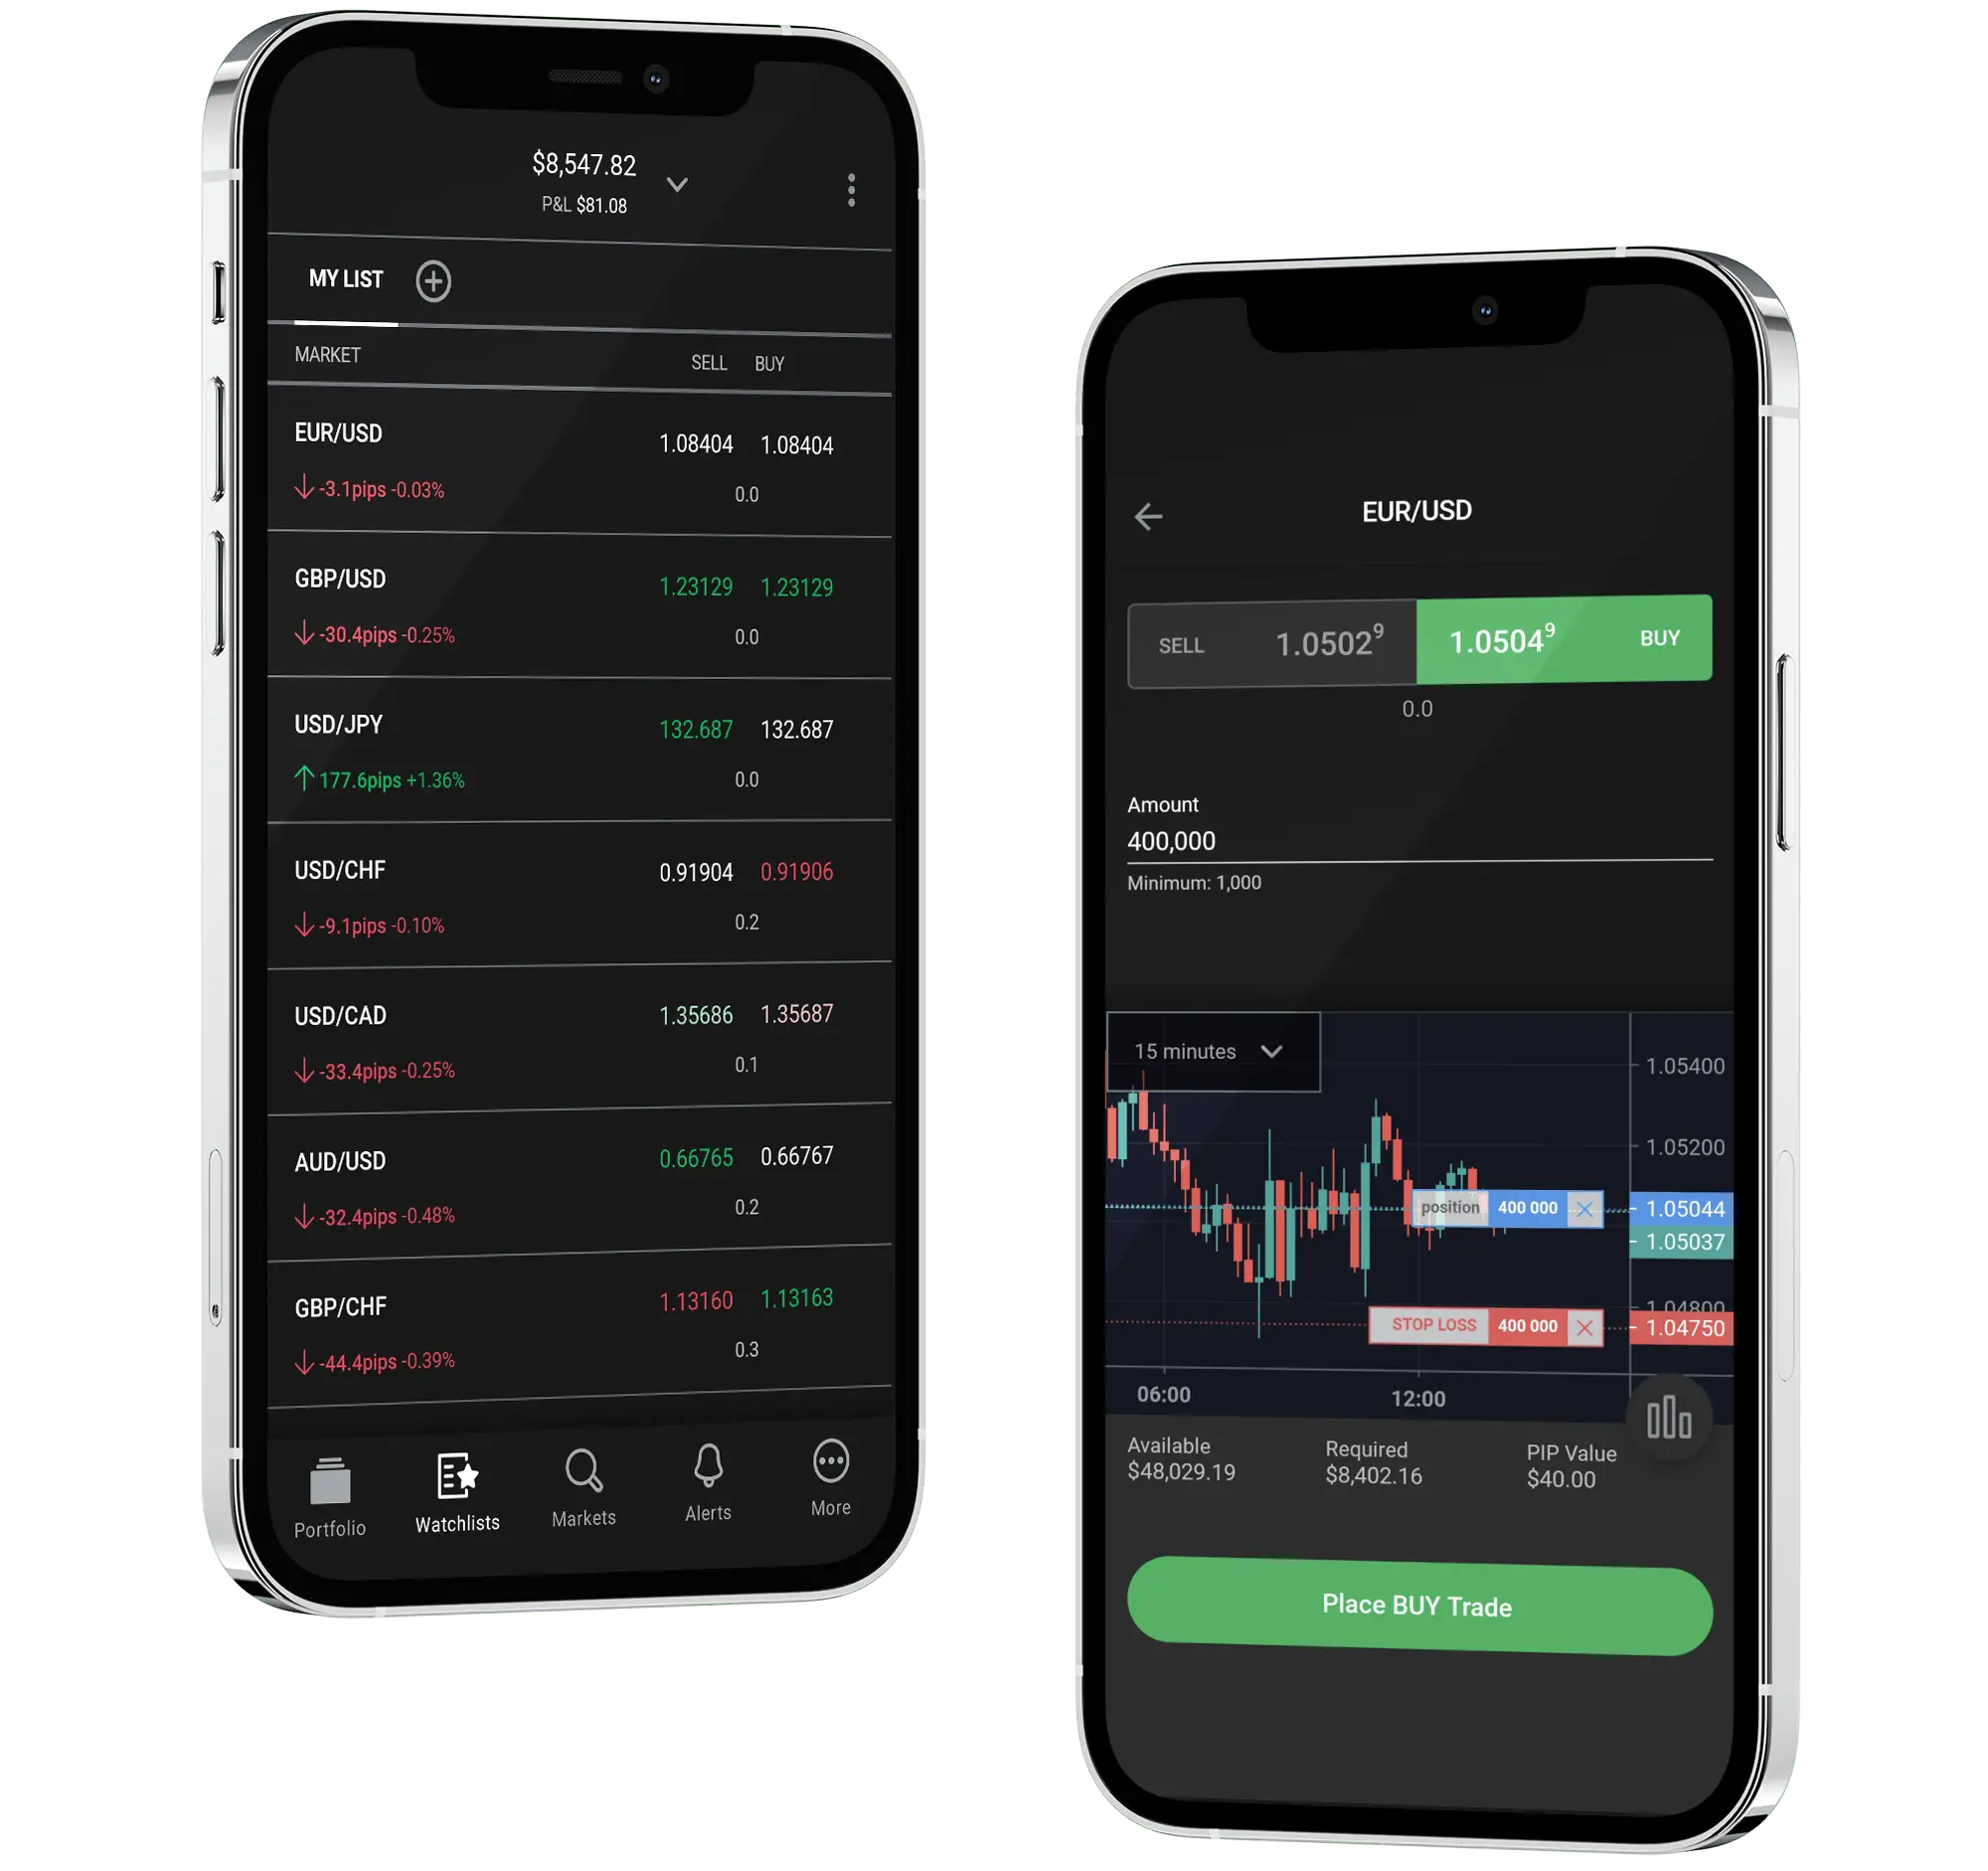 Mobile phones showing Forex trading app